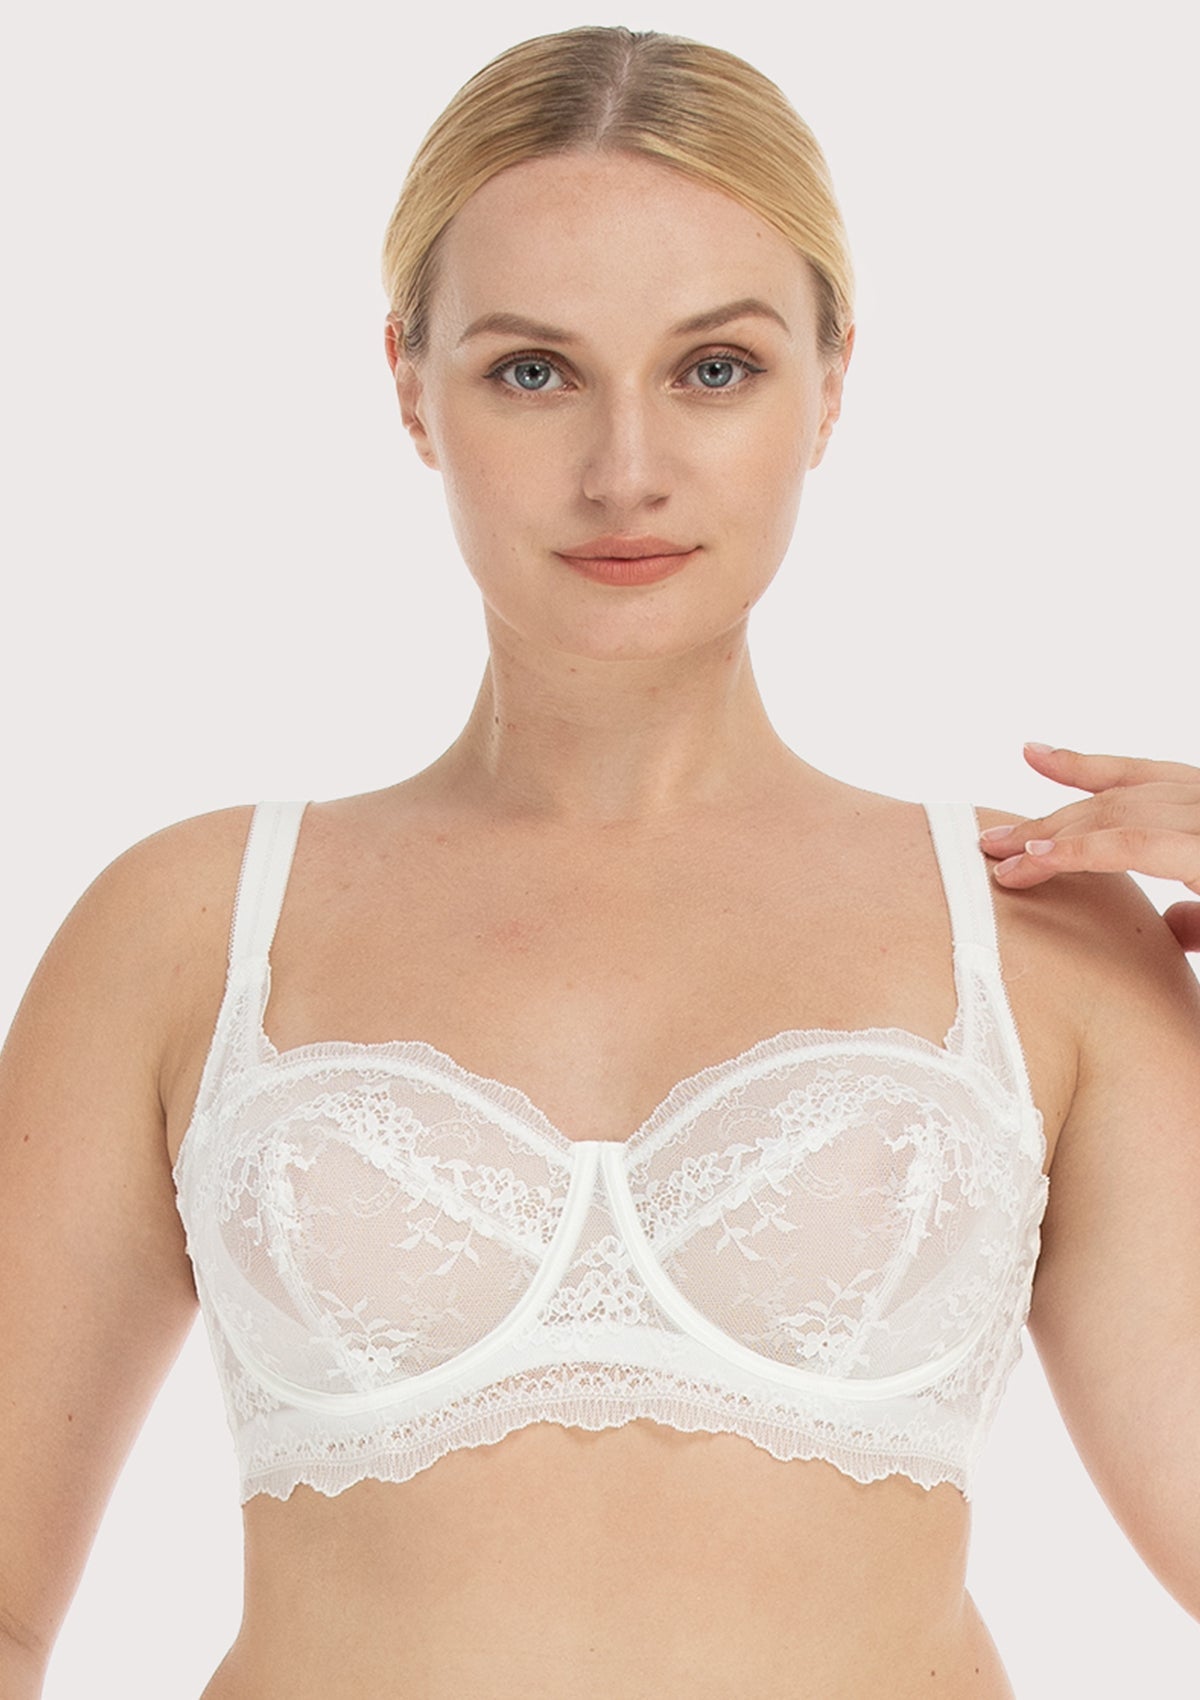 HSIA I Do Floral Lace Bridal Balconette Beautiful Bra For Special Day - Burgundy / 38 / DD/E